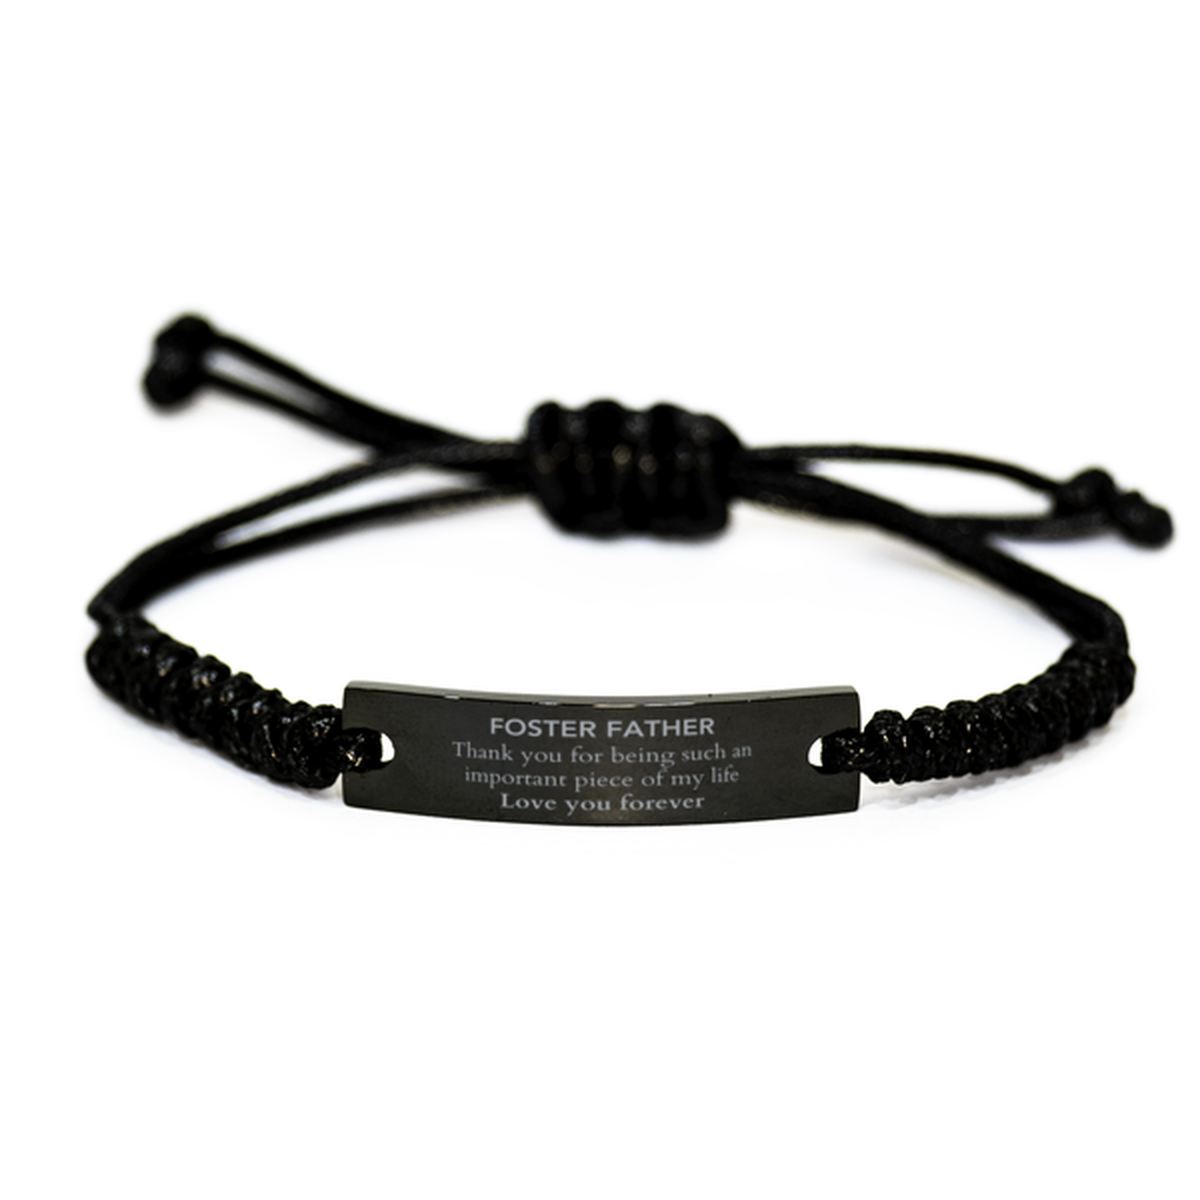 Appropriate Foster Father Black Rope Bracelet Epic Birthday Gifts for Foster Father Thank you for being such an important piece of my life Foster Father Christmas Mothers Fathers Day